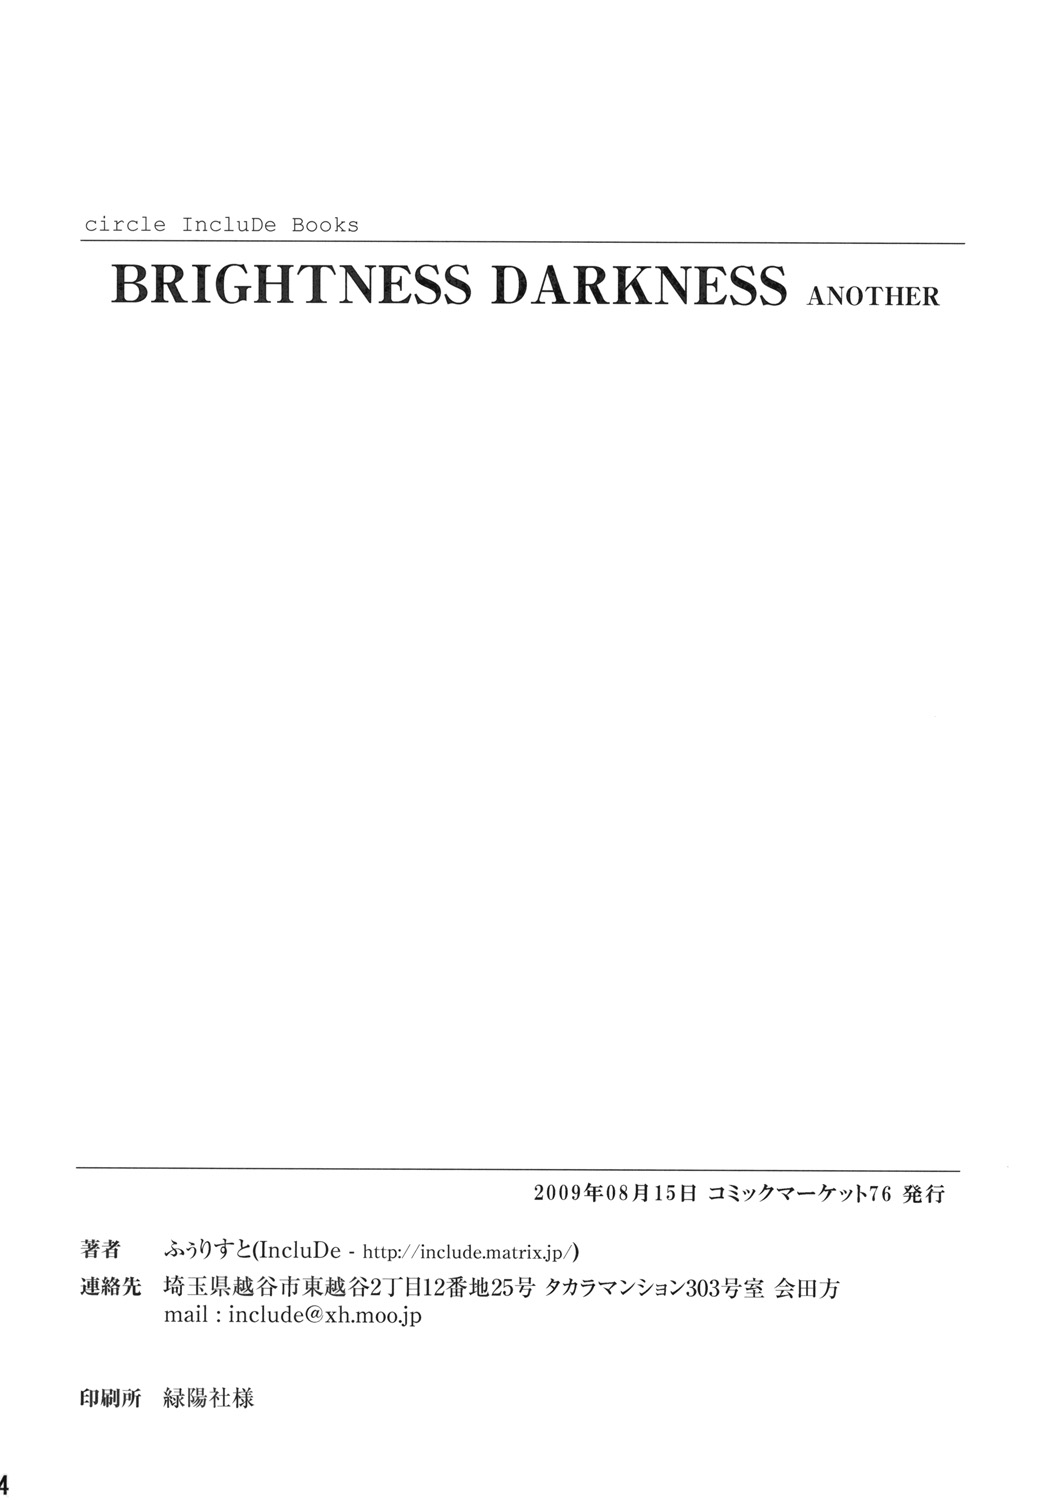 (C76) [IncluDe (ふぅりすと)] 催眠異変 壱 BRIGHTNESS DARKNESS ANOTHER (東方Project)